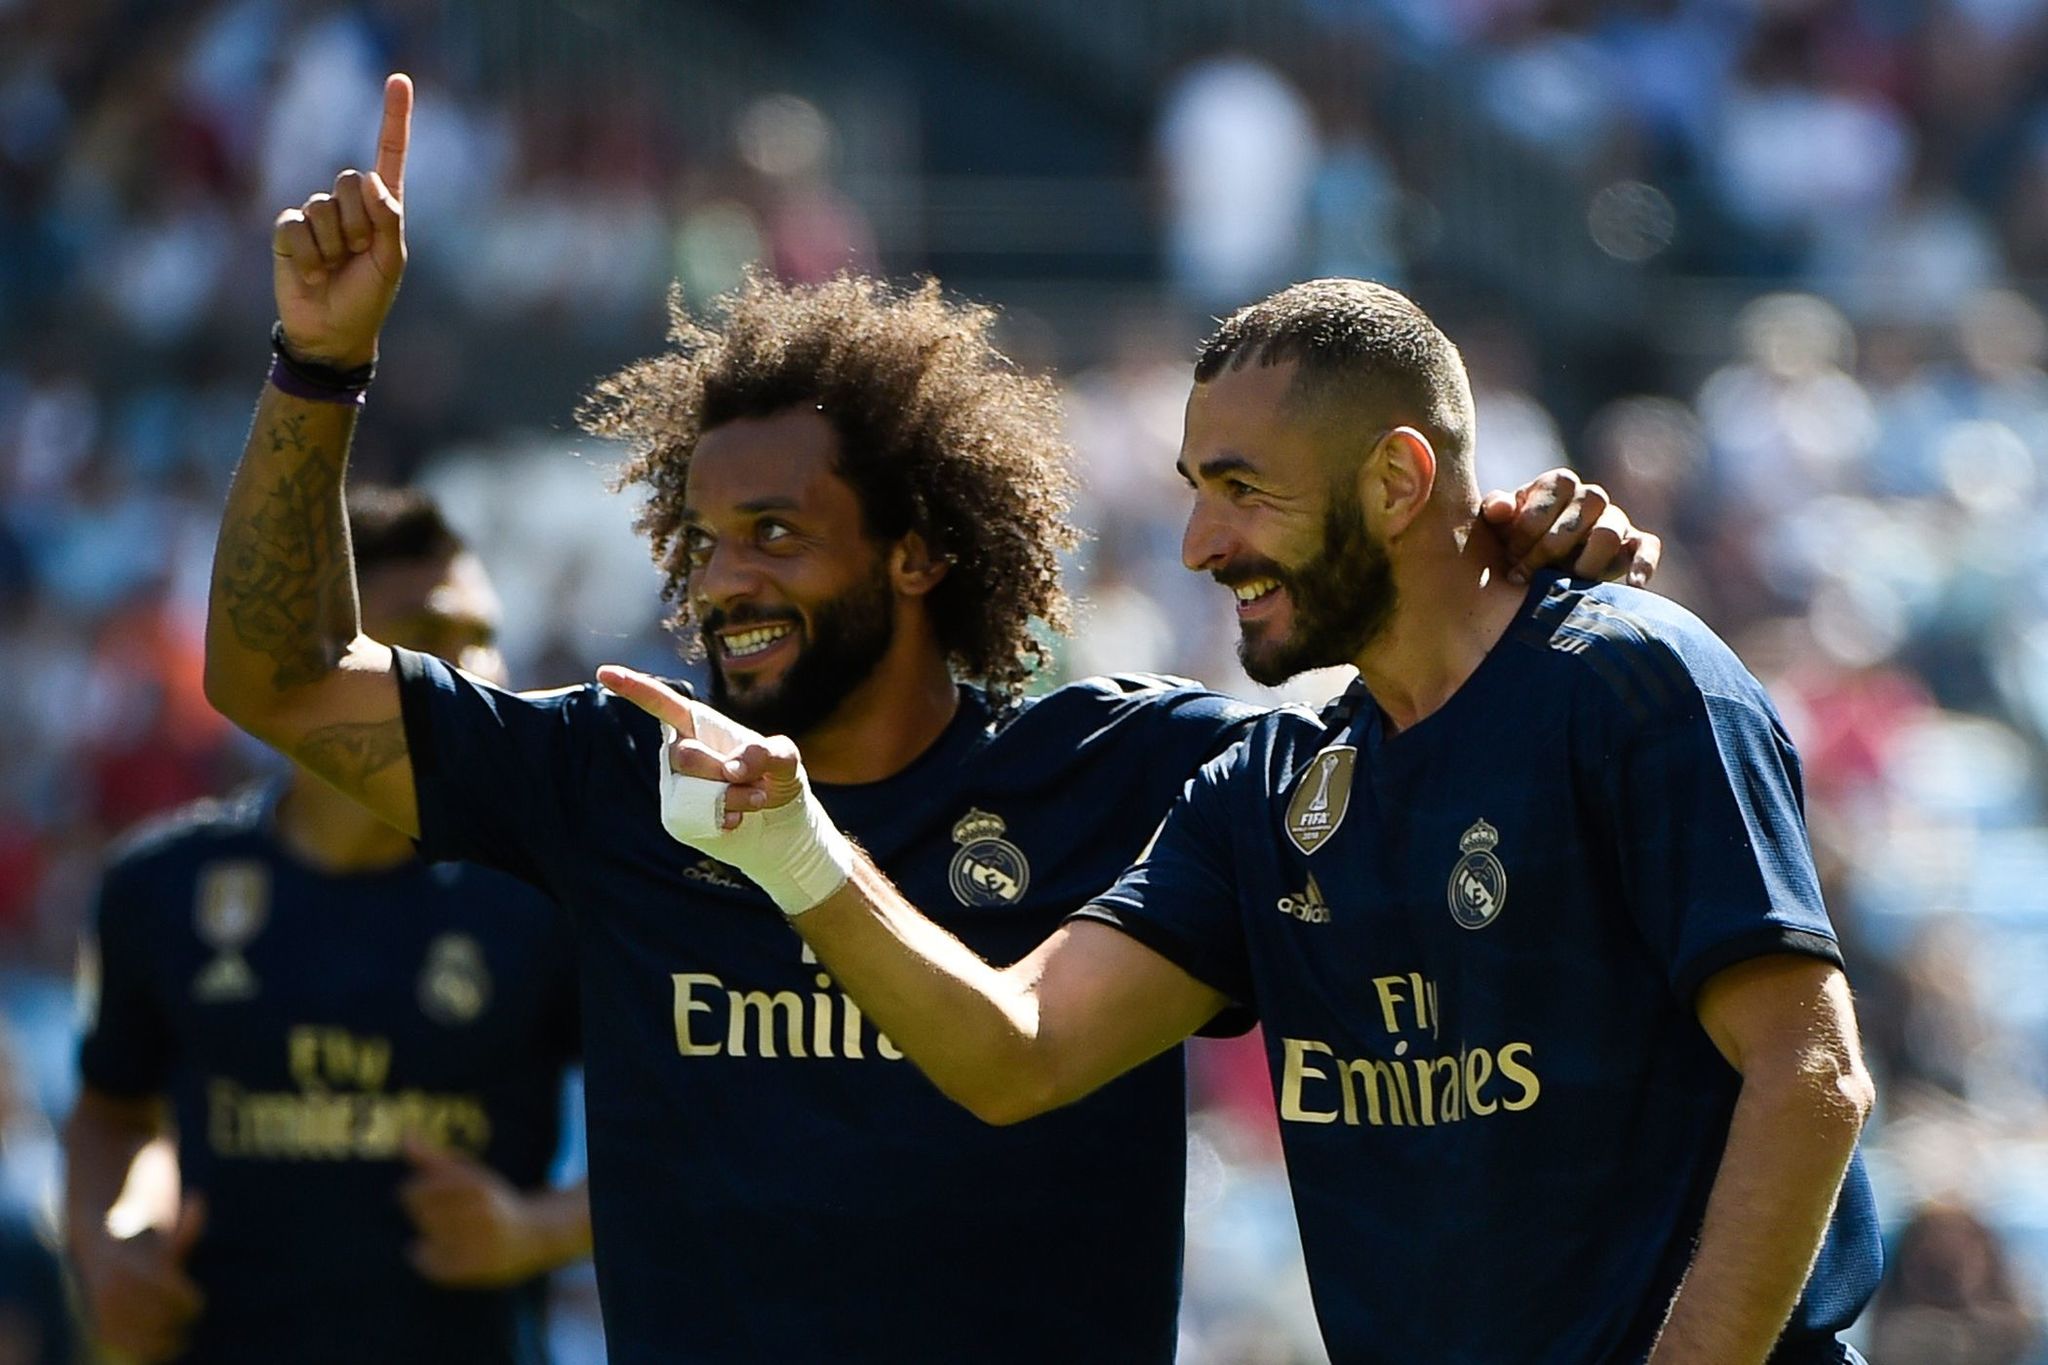 Real Madrids French forward Karim Benzema (R) celebrates with Real Madrids Brazilian defender <HIT>Marcelo</HIT> after scoring a goal during the Spanish League football match between Celta Vigo and Real Madrid at the Balaidos Stadium in Vigo on August 17, 2019. (Photo by MIGUEL RIOPA / AFP)